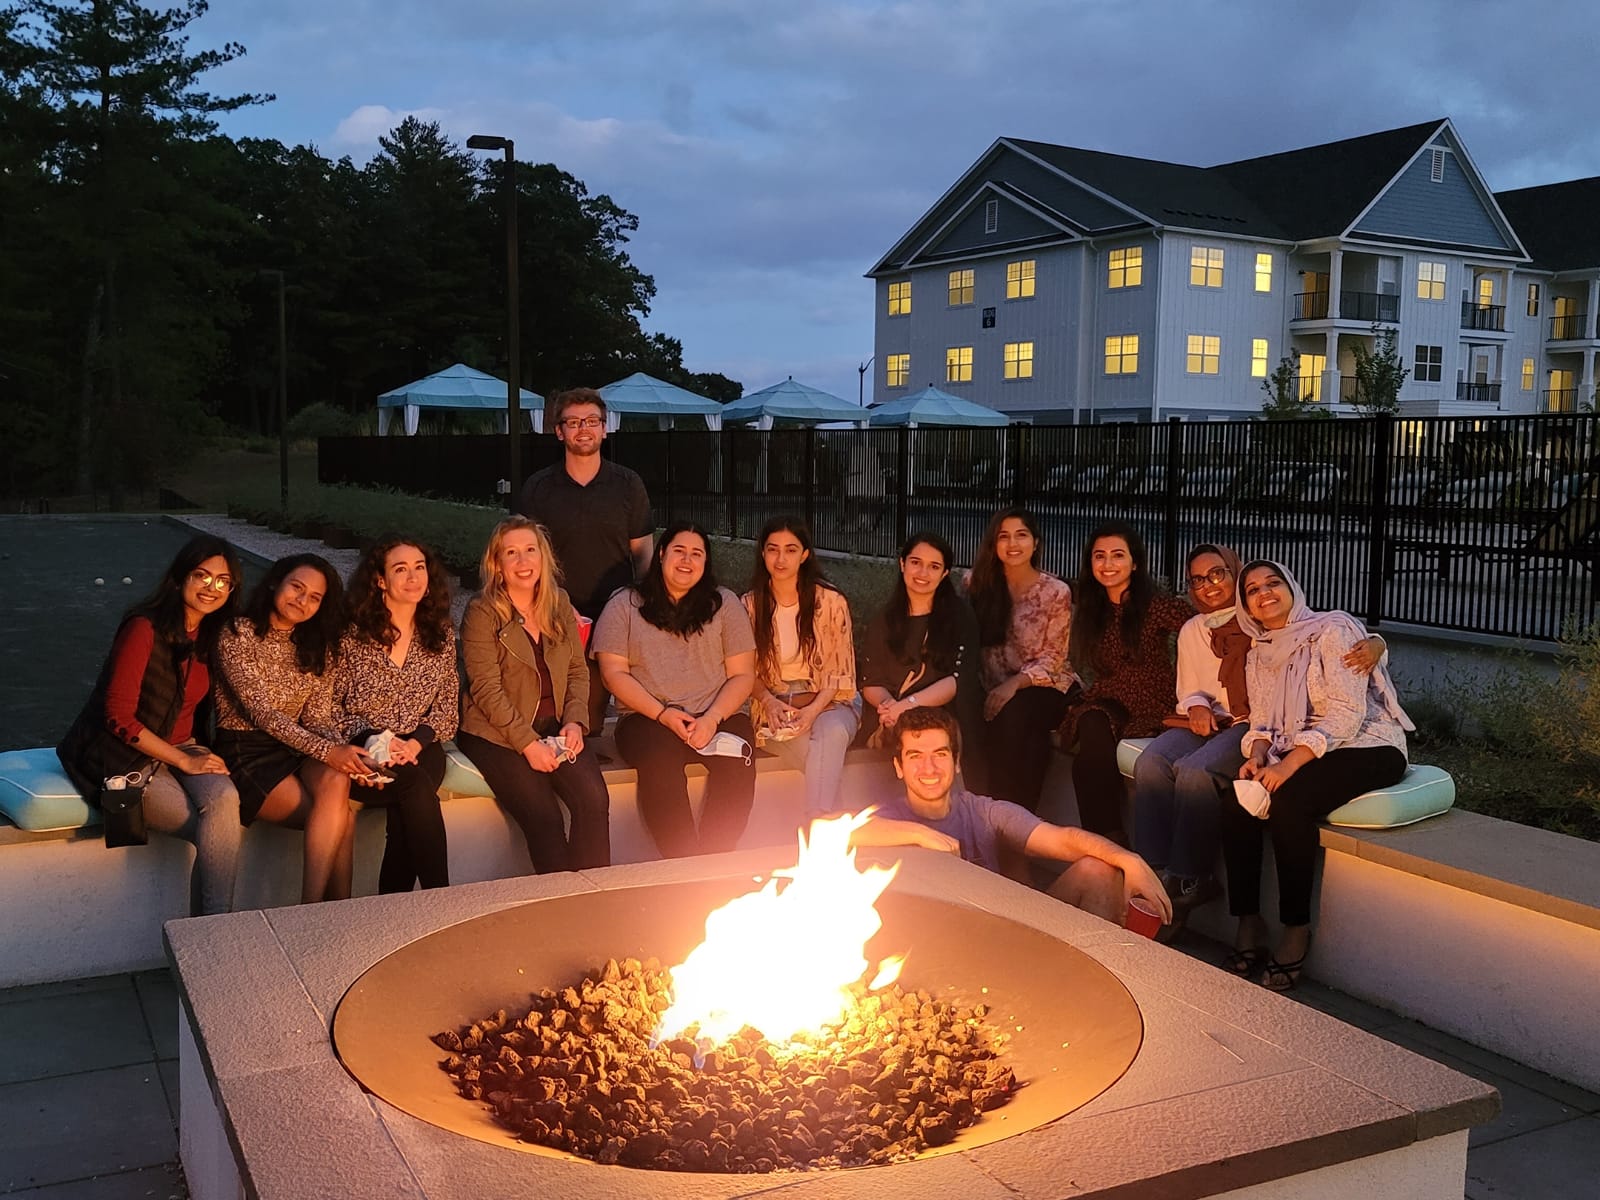 Outdoor nighttime group photo of internal medicine residents sitting around a fire